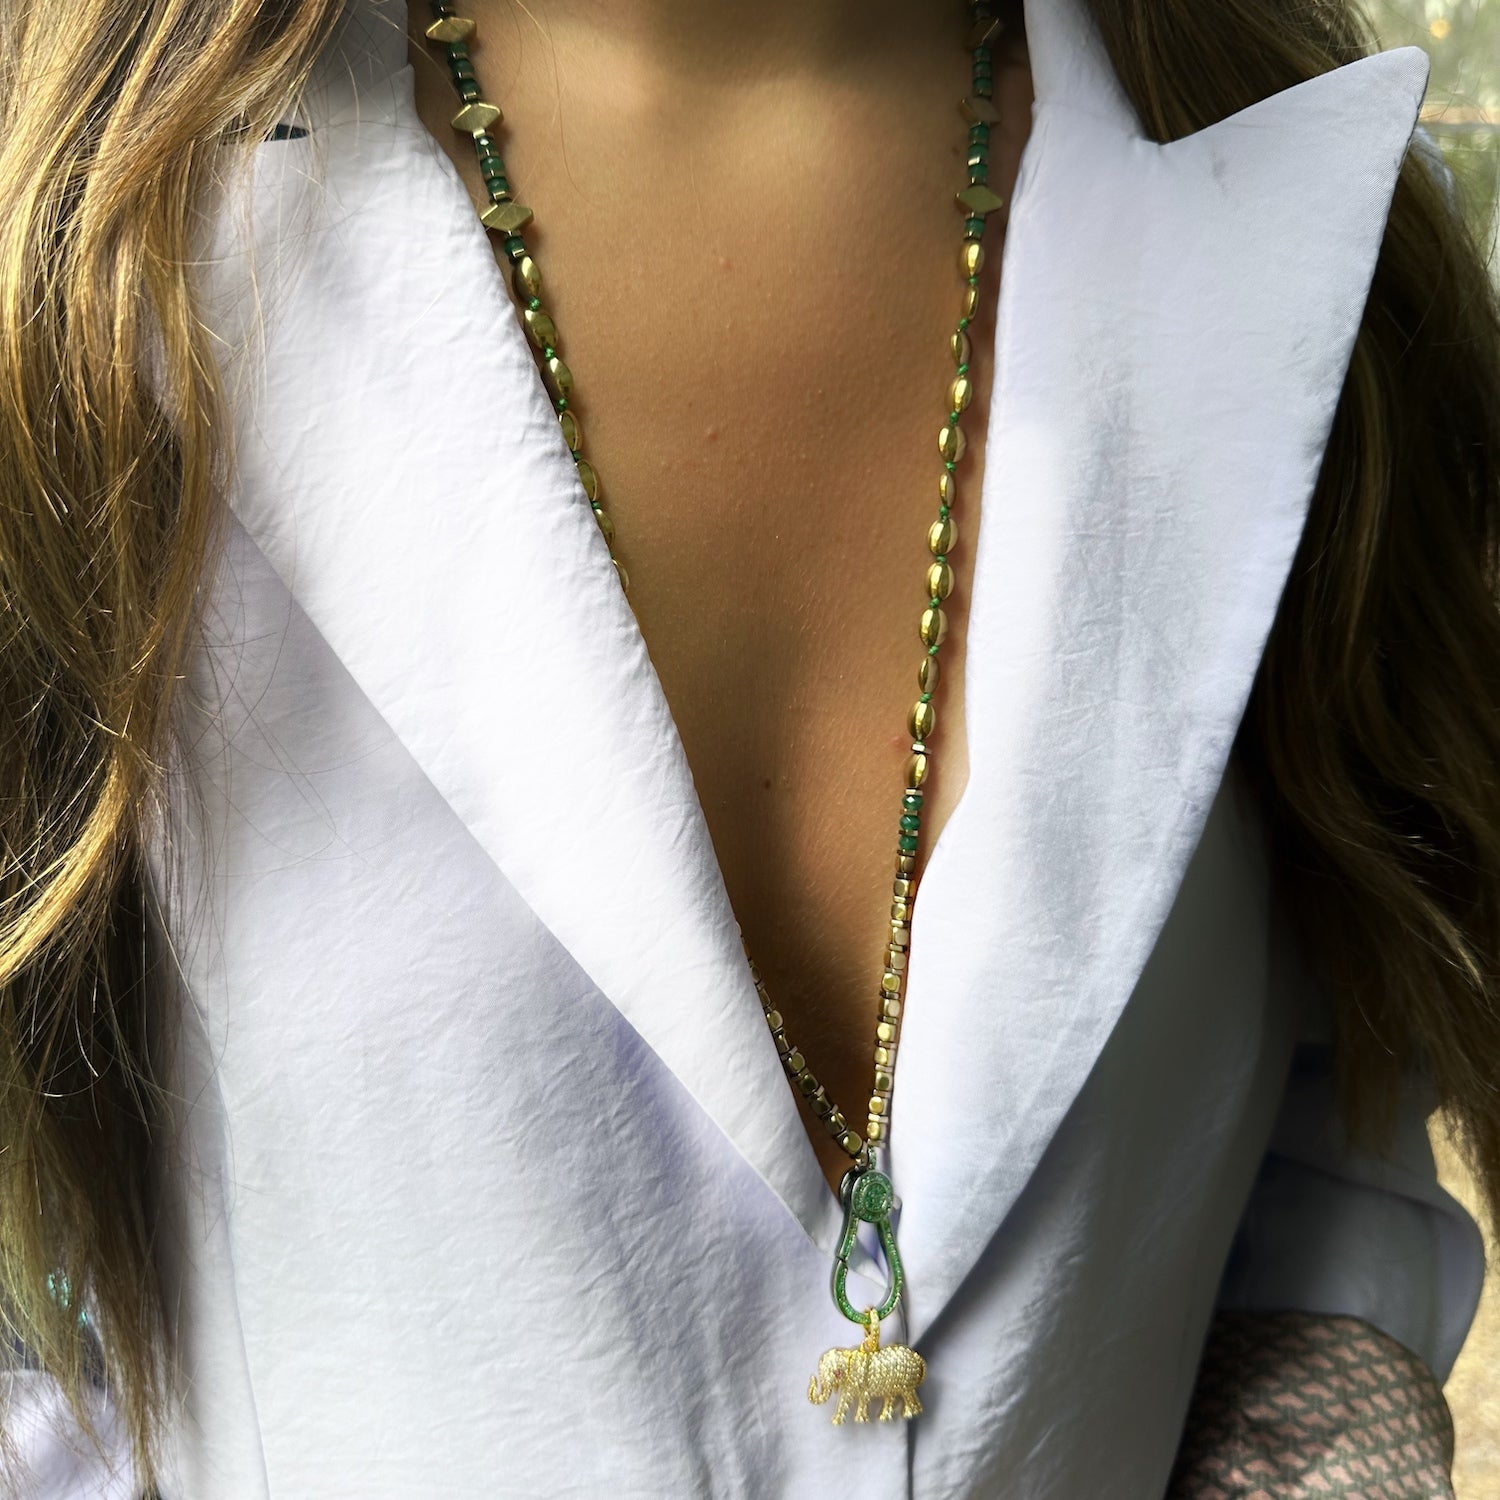 A model wearing the Diamond Elephant Golden Necklace, the pendant beautifully resting against her chest, showcasing the elegance and statement-making quality of the necklace when worn.